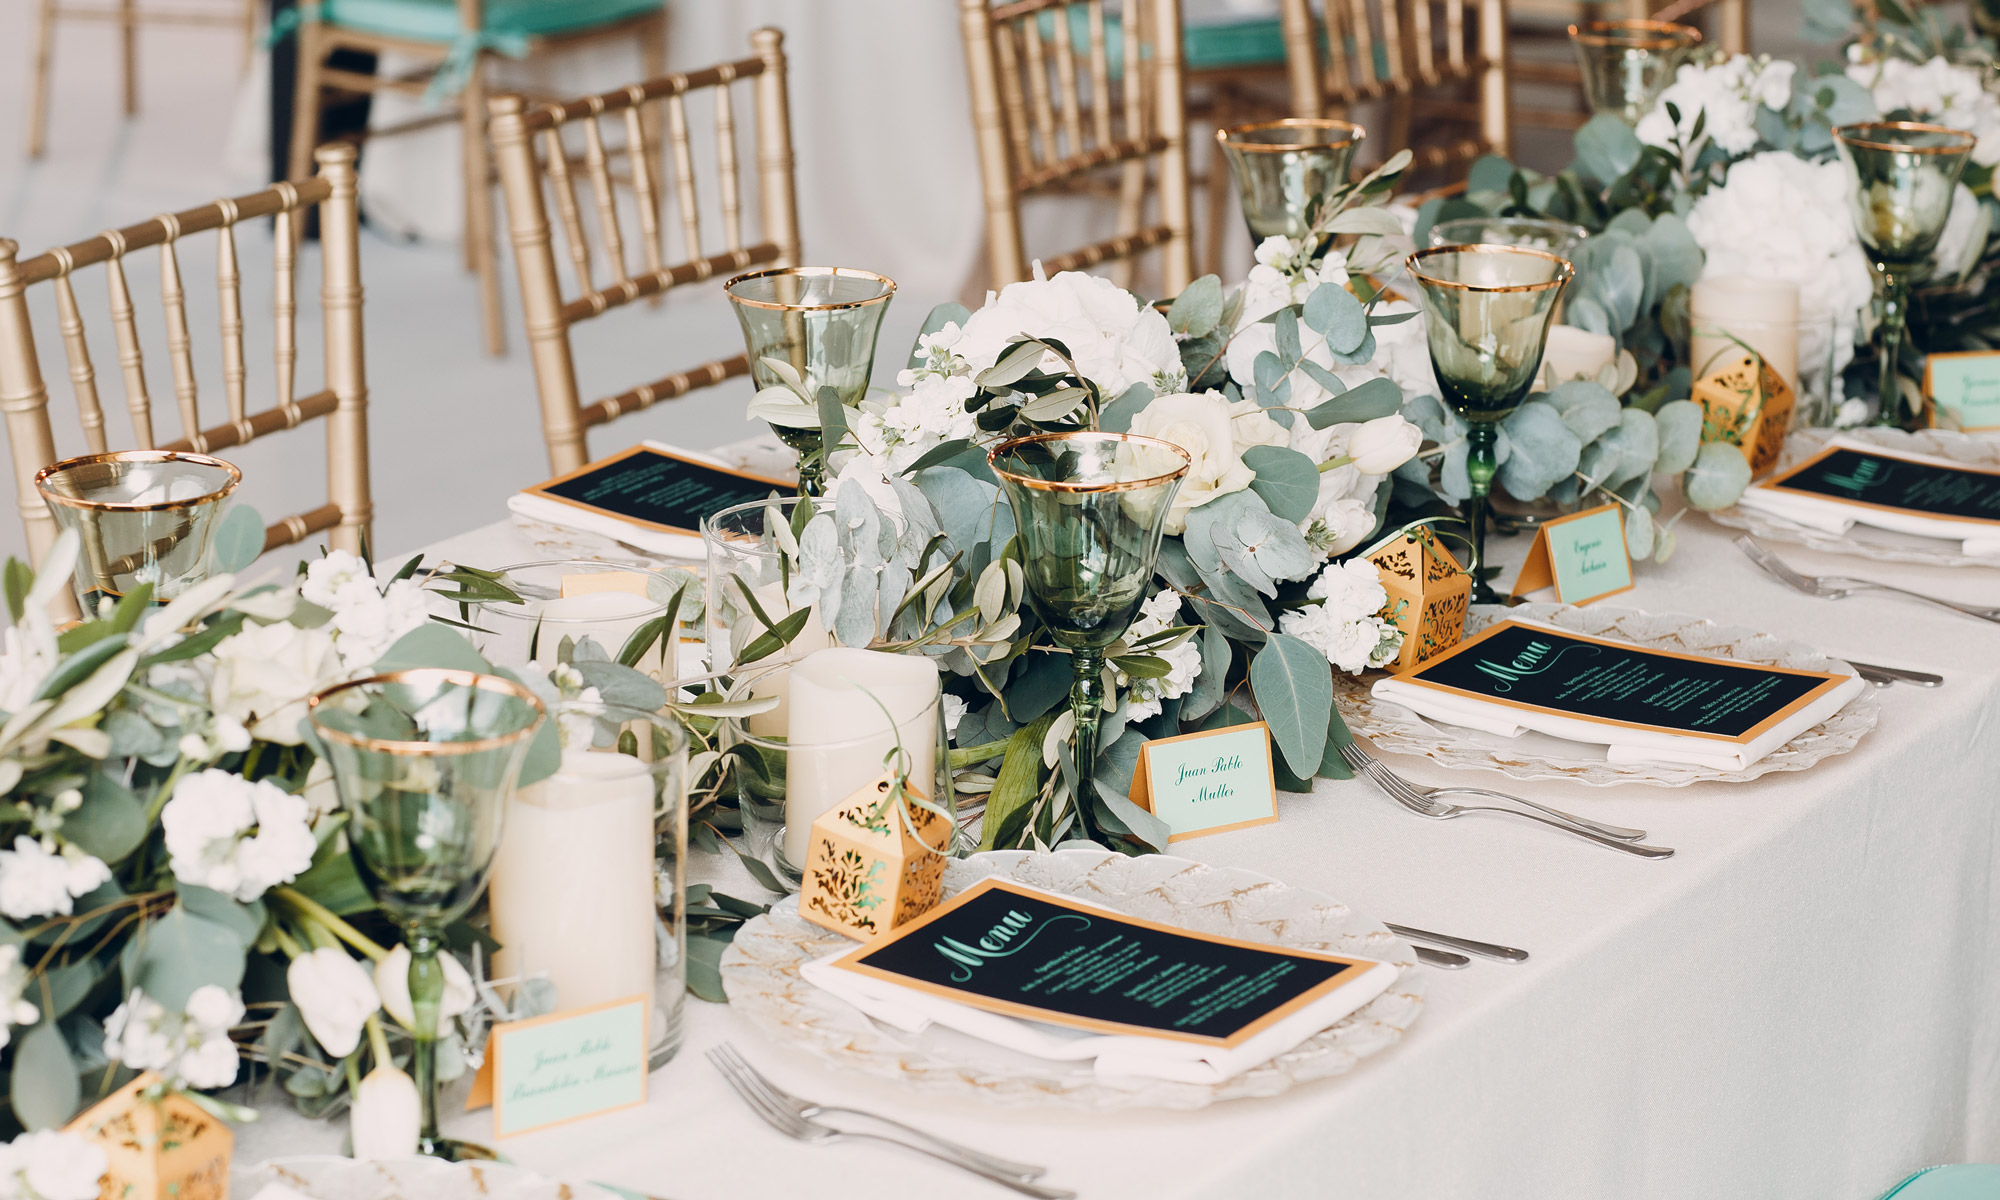 Dressing Your Venue in Eco-Friendly Wedding Decorations